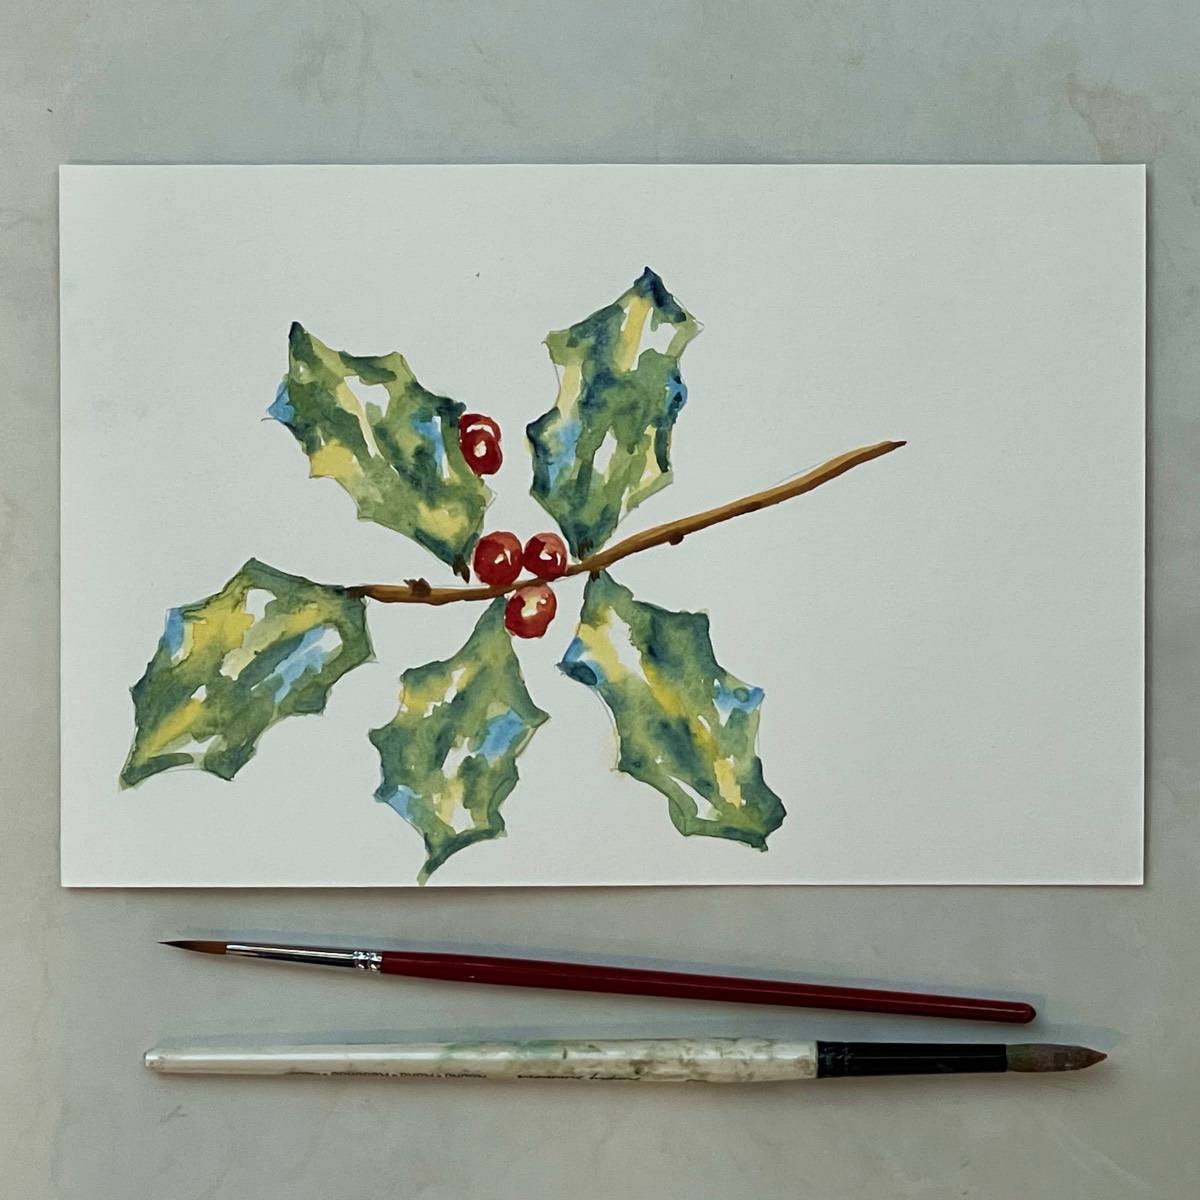 Watercolor painting of a spring of holly with paint brushes.